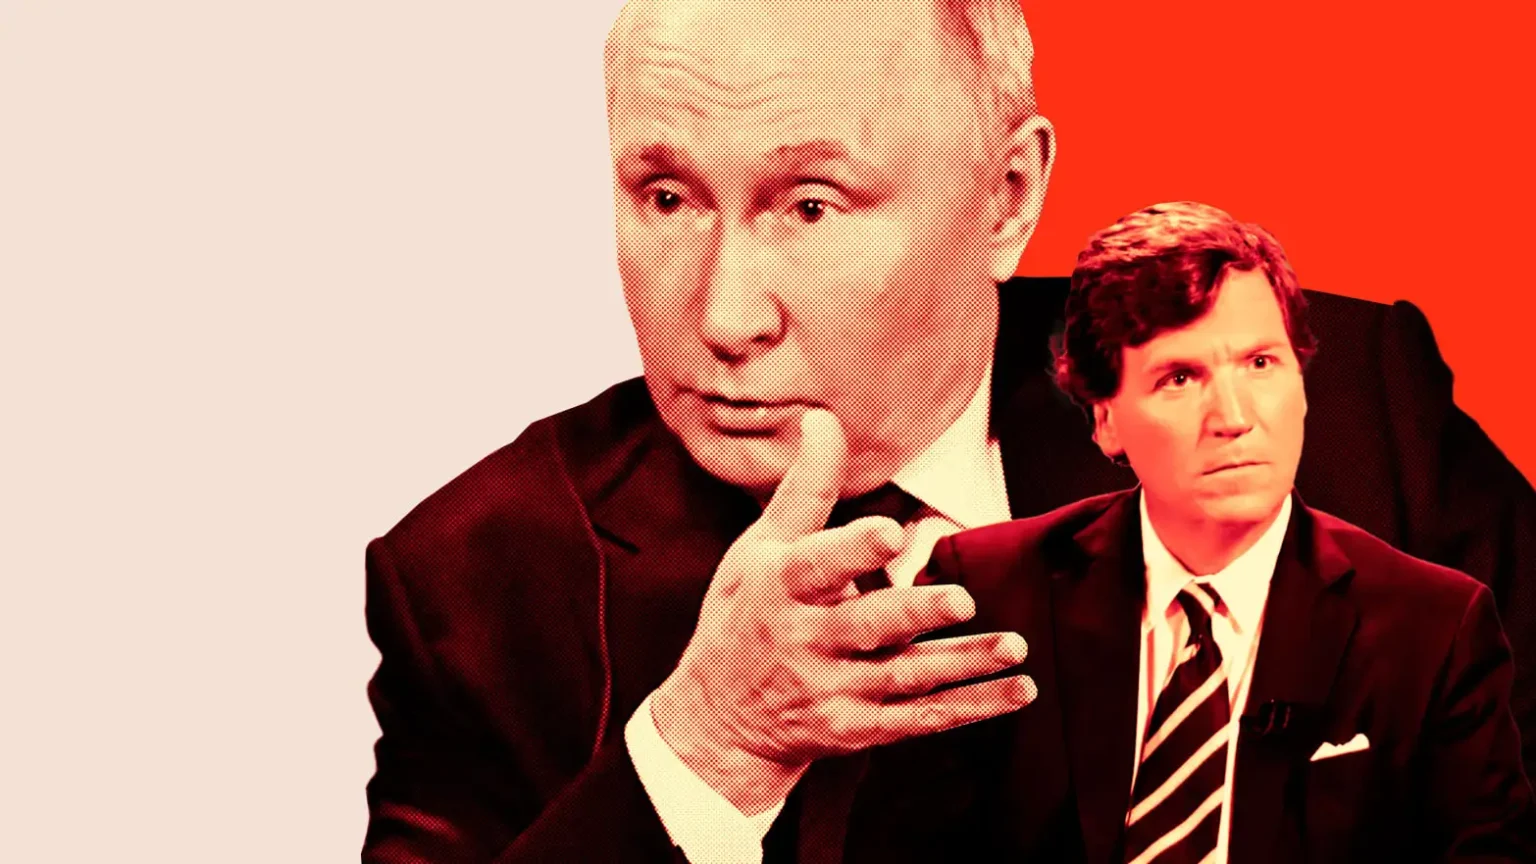 key-takeaways-from-an-interview-hosted-by-tucker-carlson-with-a-controversial-guest-russian-president-vladimir-putin